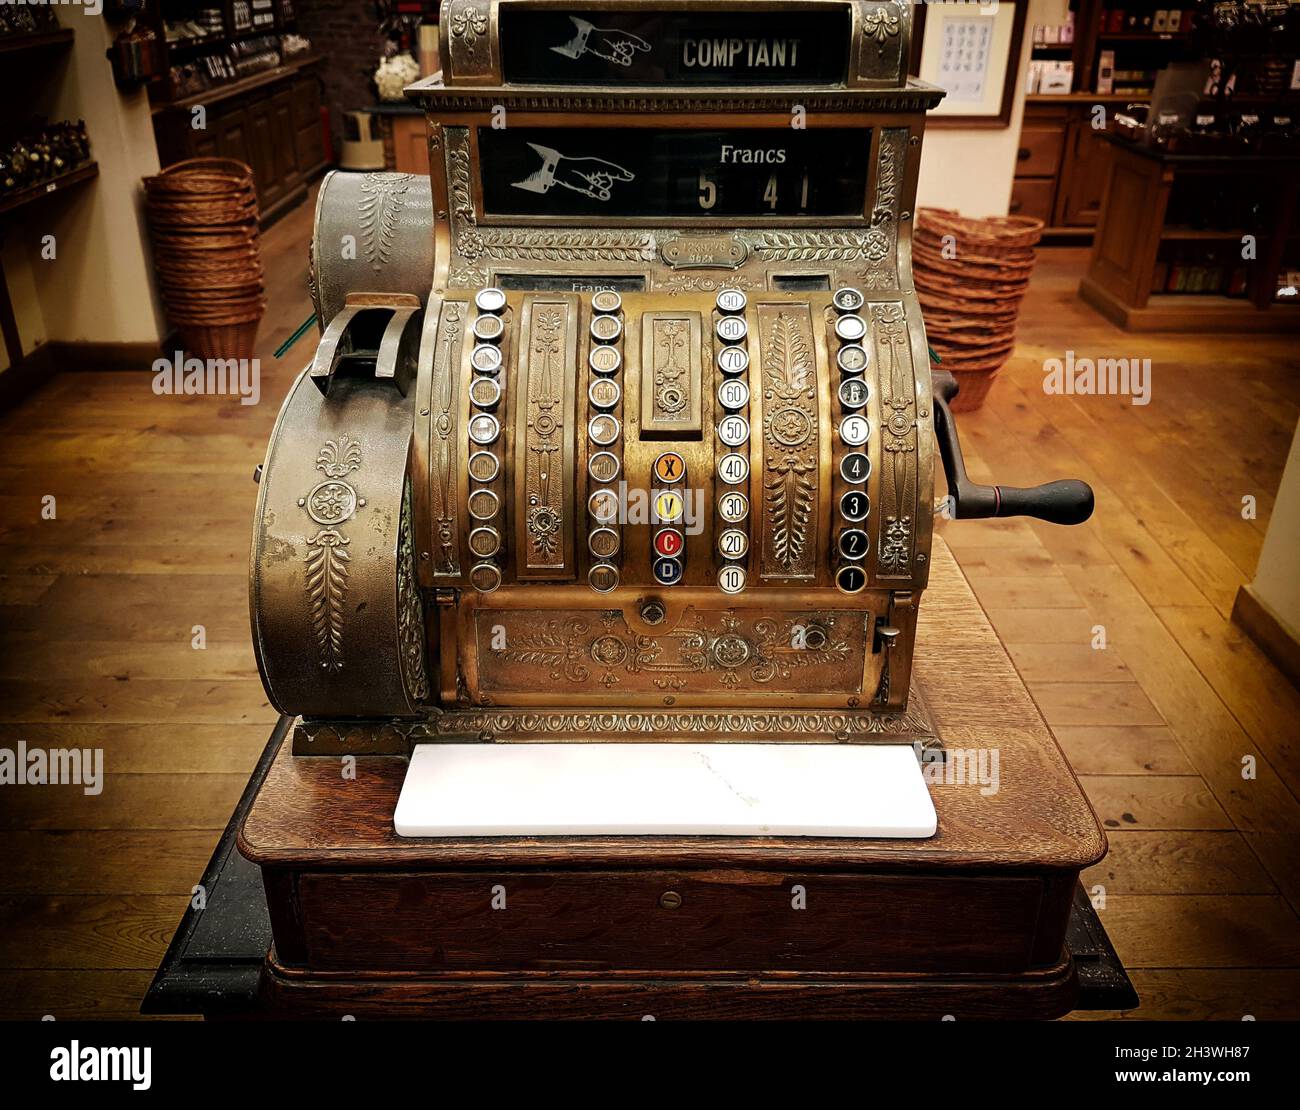 Old vintage cash register isolated in a shop Stock Photo